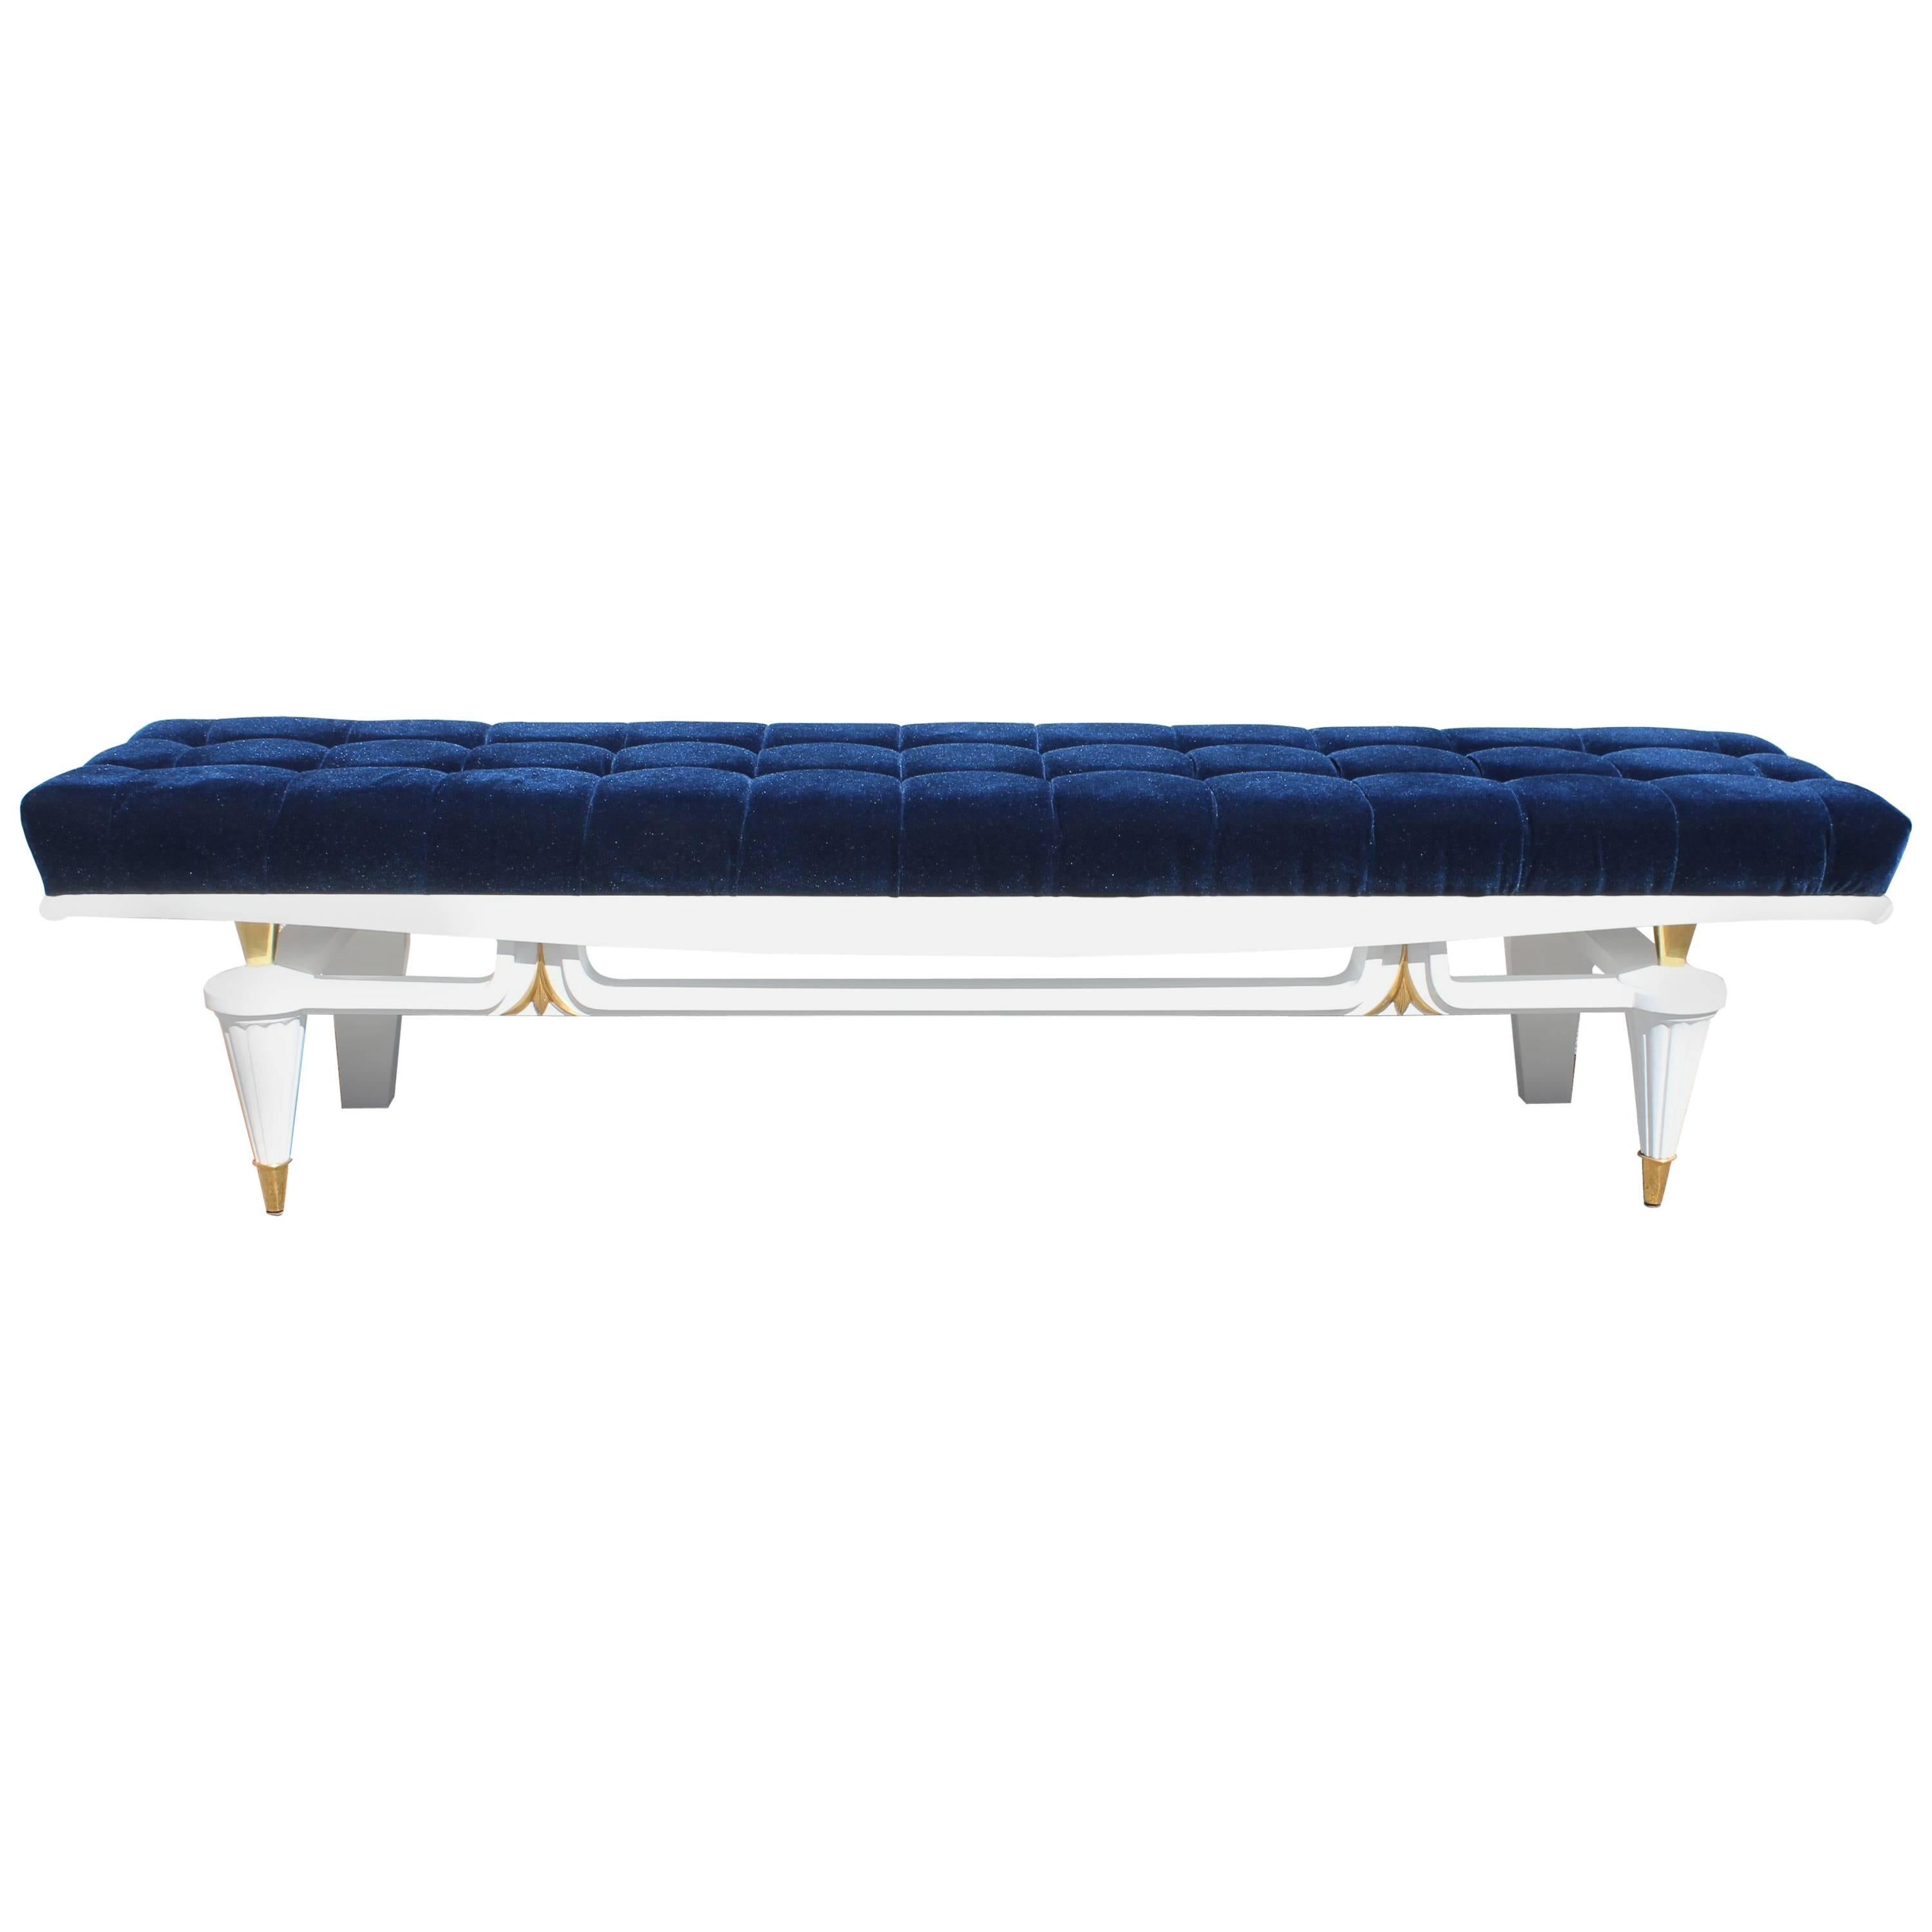 Monumental French Art Deco Snow White Lacquered Long Sitting Bench, circa 1940s For Sale